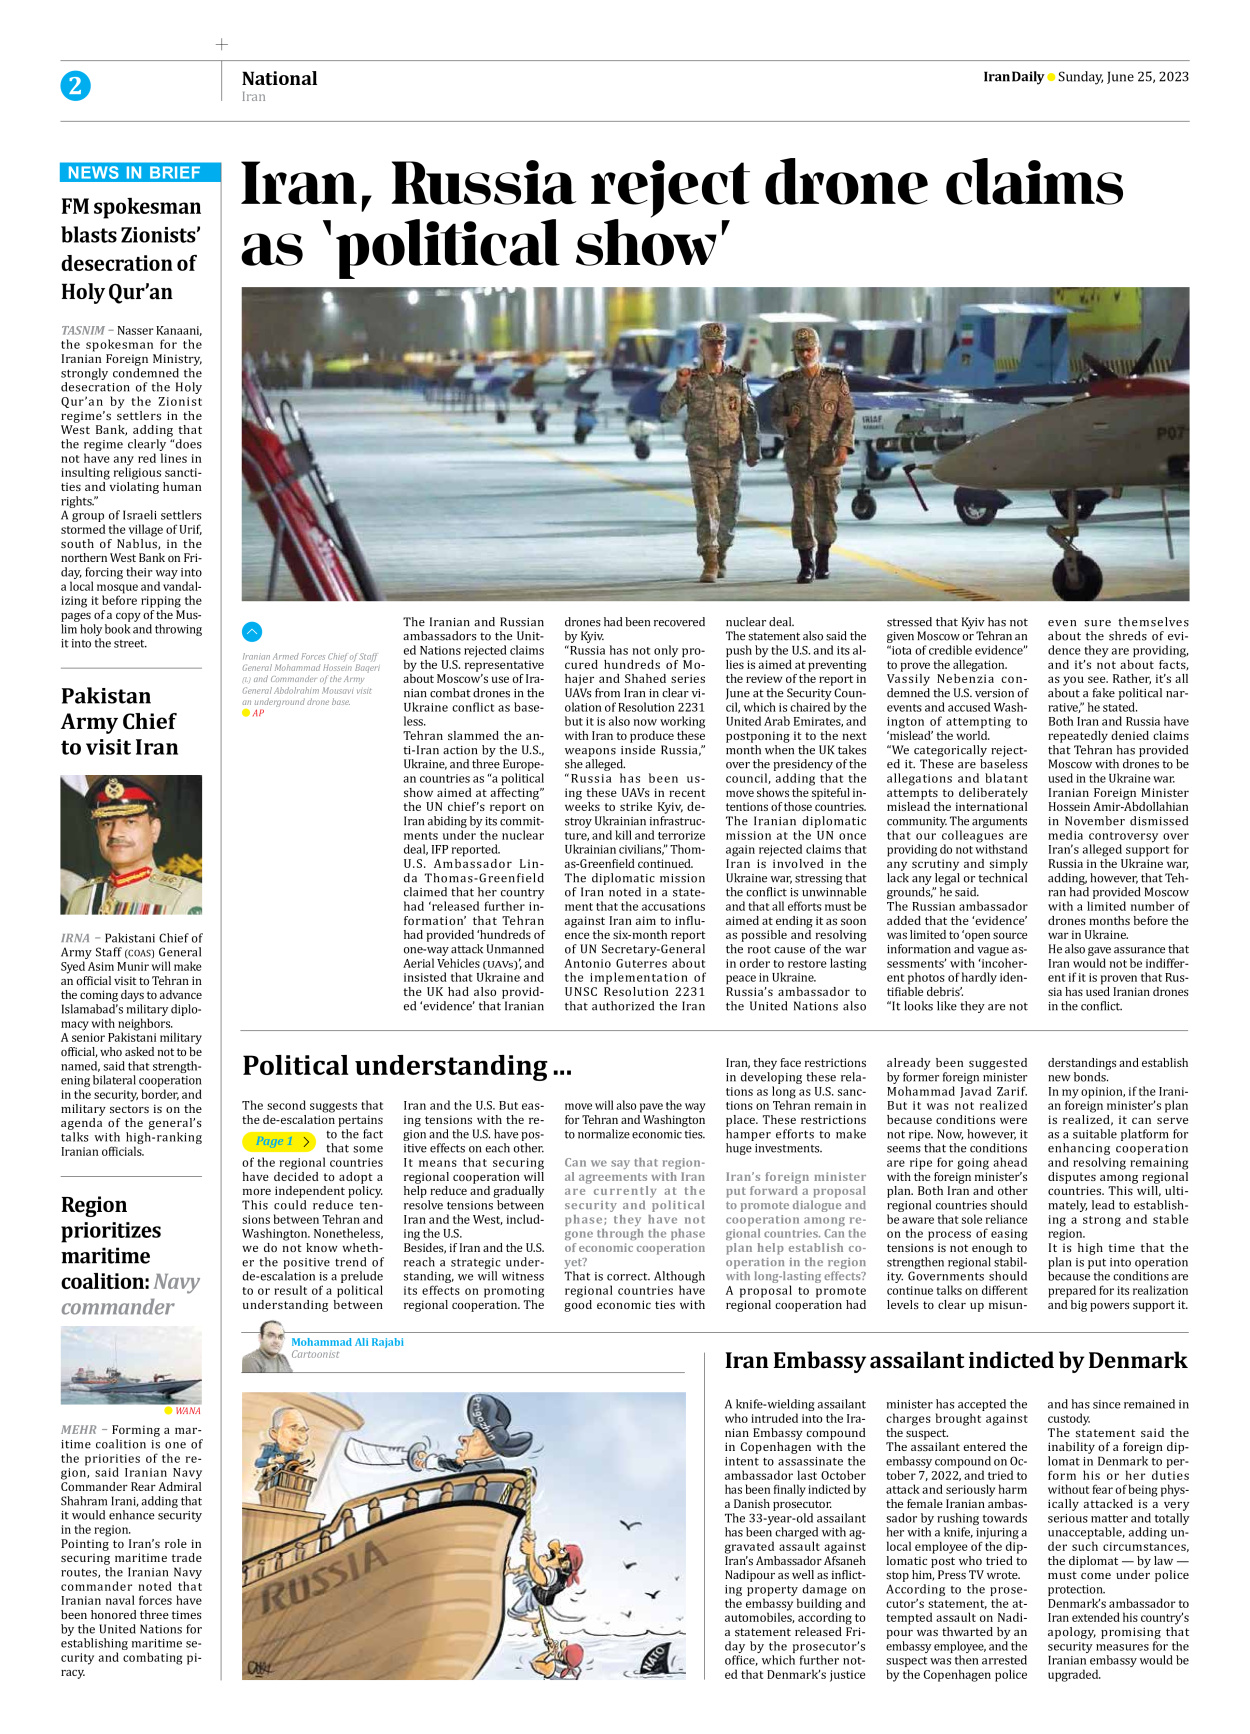 Iran Daily - Number Seven Thousand Three Hundred and Twenty Three - 25 June 2023 - Page 2